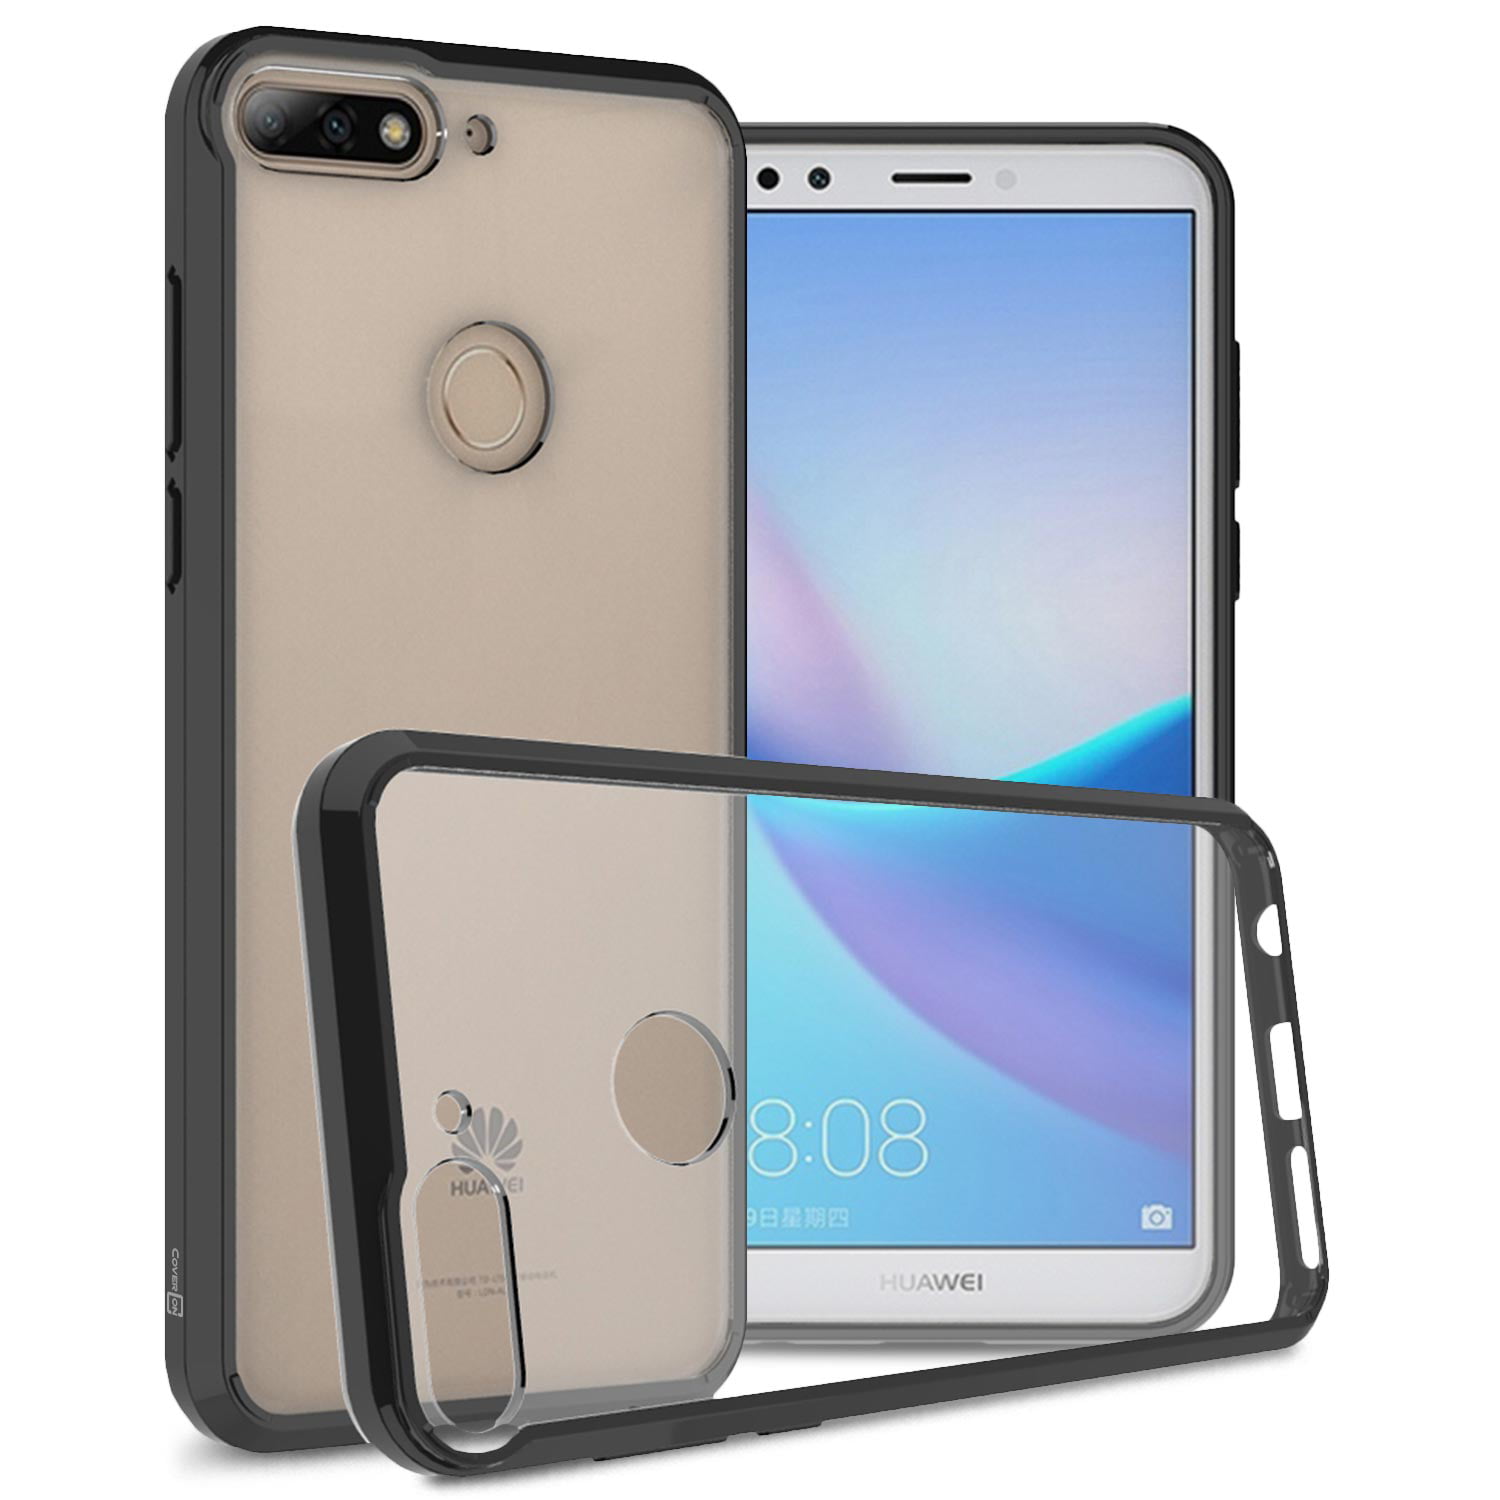 Mobiliseren kalender Straat CoverON Huawei Y7 Prime 2018 Case, ClearGuard Series Clear Hard Phone Cover  - Walmart.com